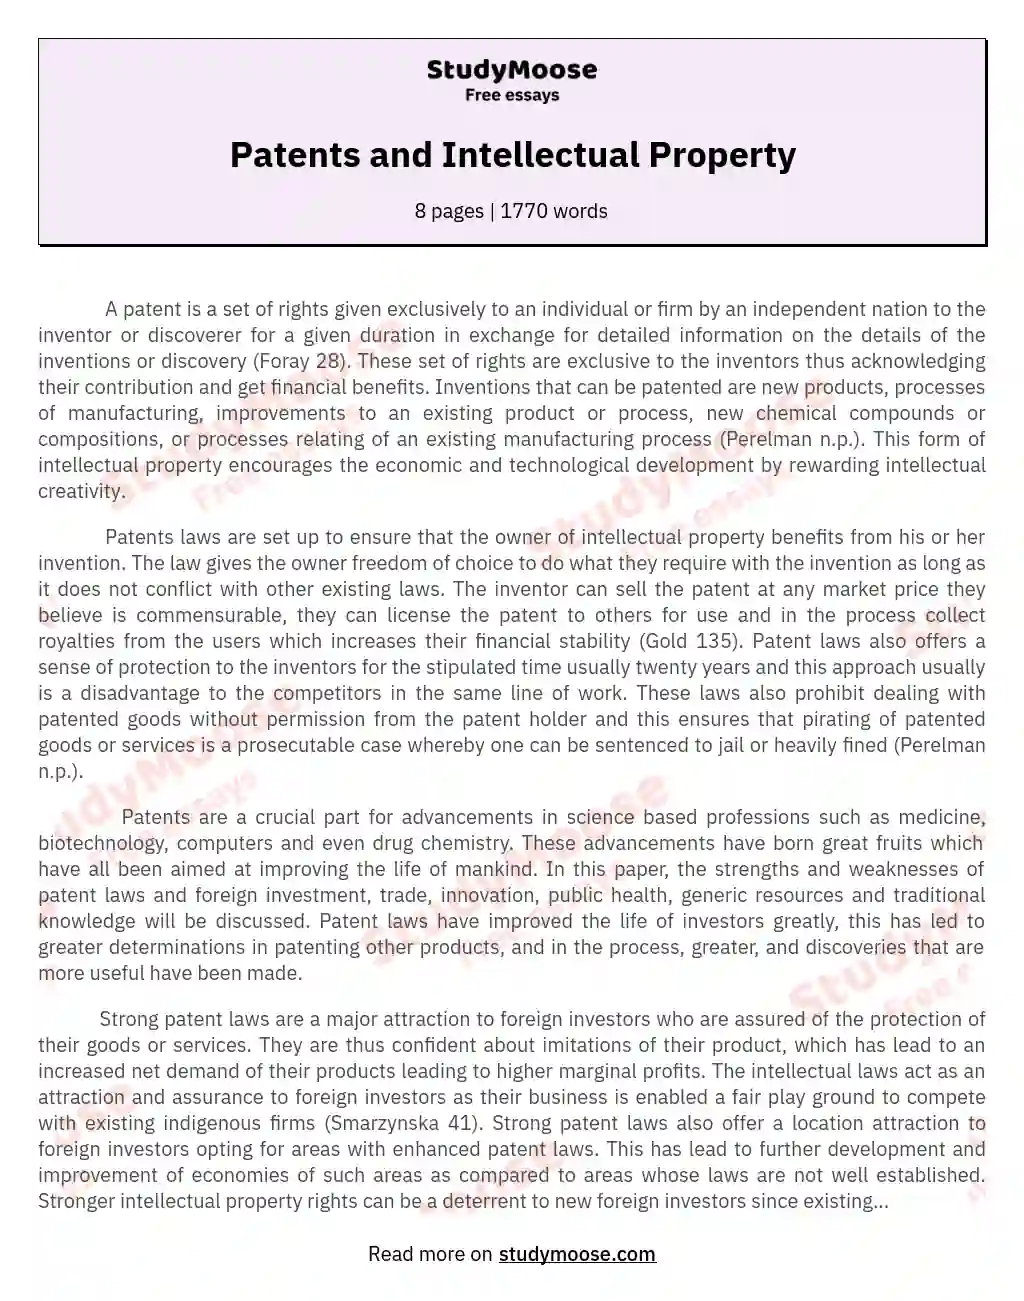 Patents and Intellectual Property essay